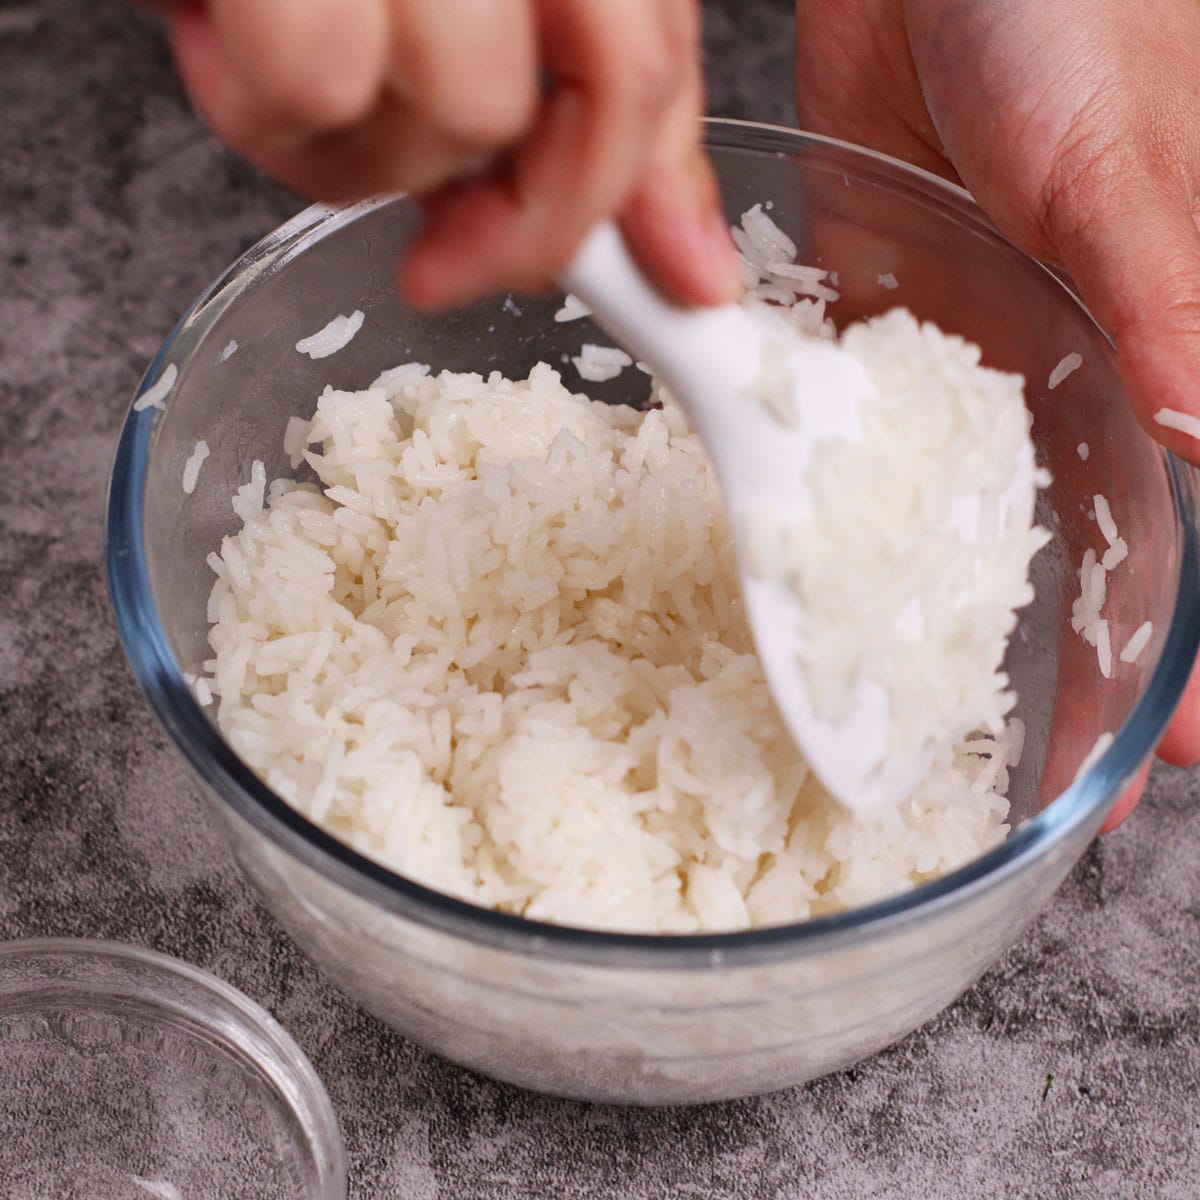 Making sushi rice out of ordinary rice.